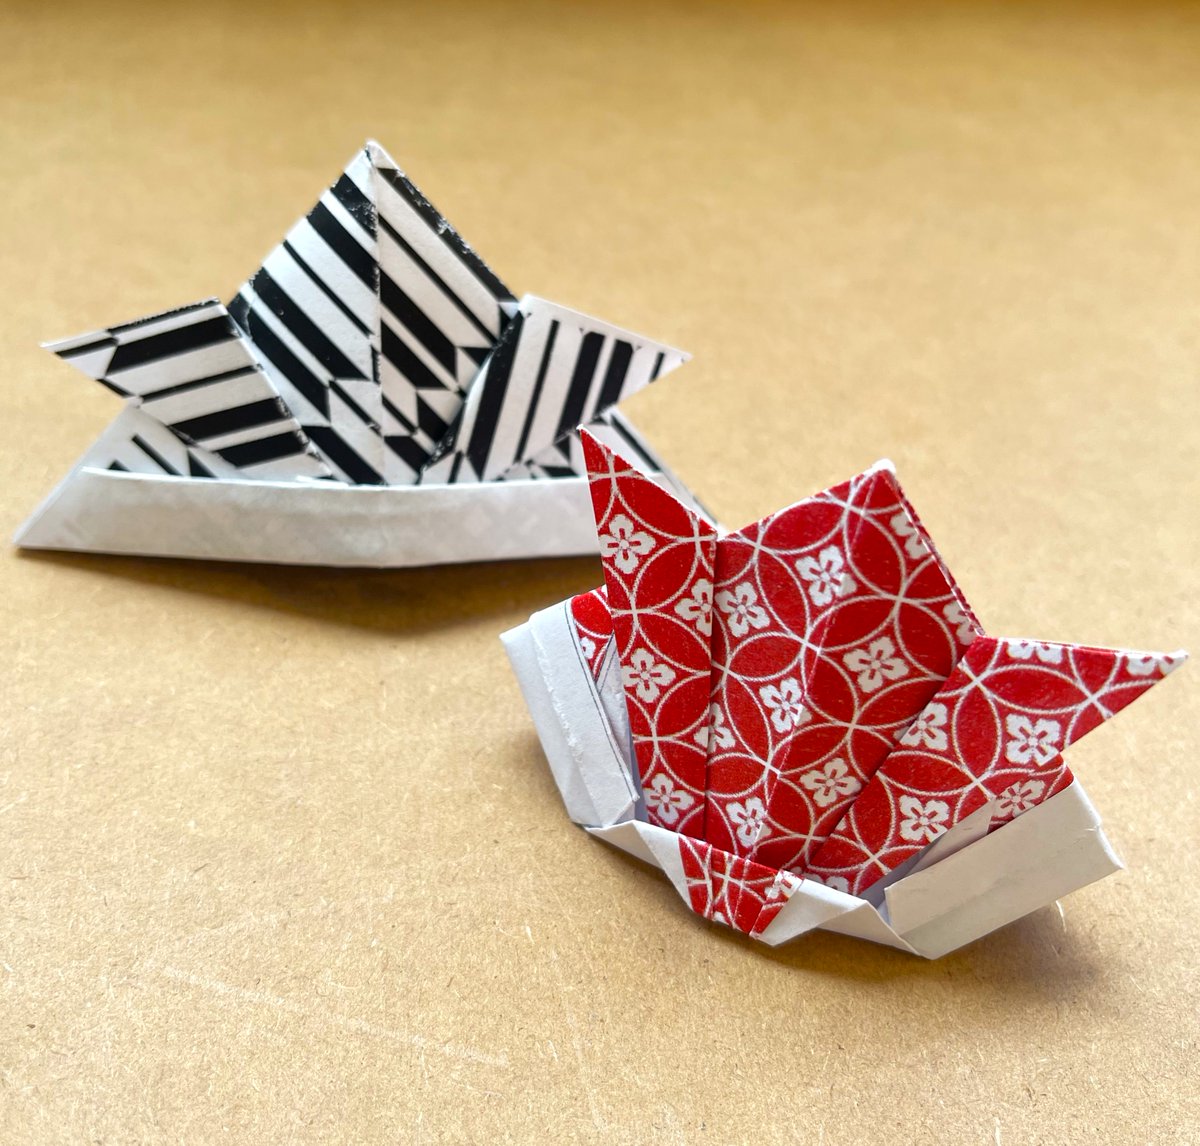 -Children’s Day-Join us in honouring Children's Day on May 5th, a day steeped in Japanese tradition, celebrating the health, growth, and joy of children. Why not immerse yourself in the tradition by crafting your own mini Origami Kabuto Helmet with Chiyogami Paper? #swaygallery